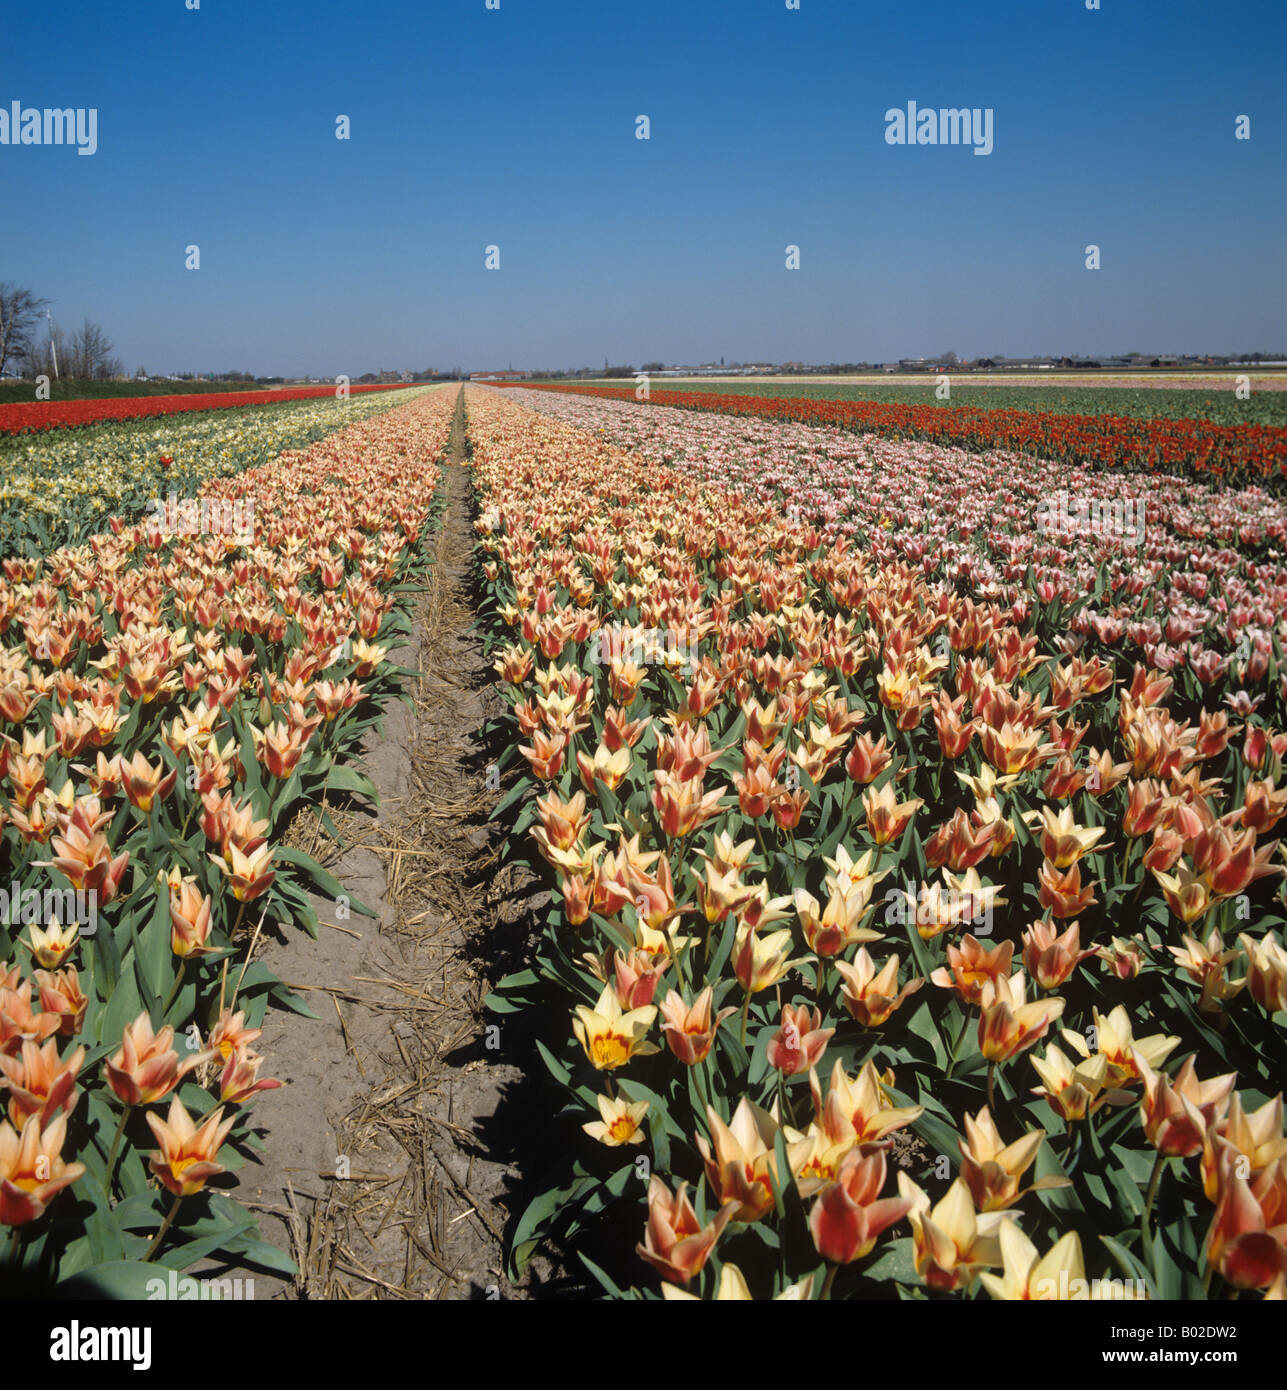 Dutch bulb field with flowering multi coloured miniature tulips Netherlands Stock Photo